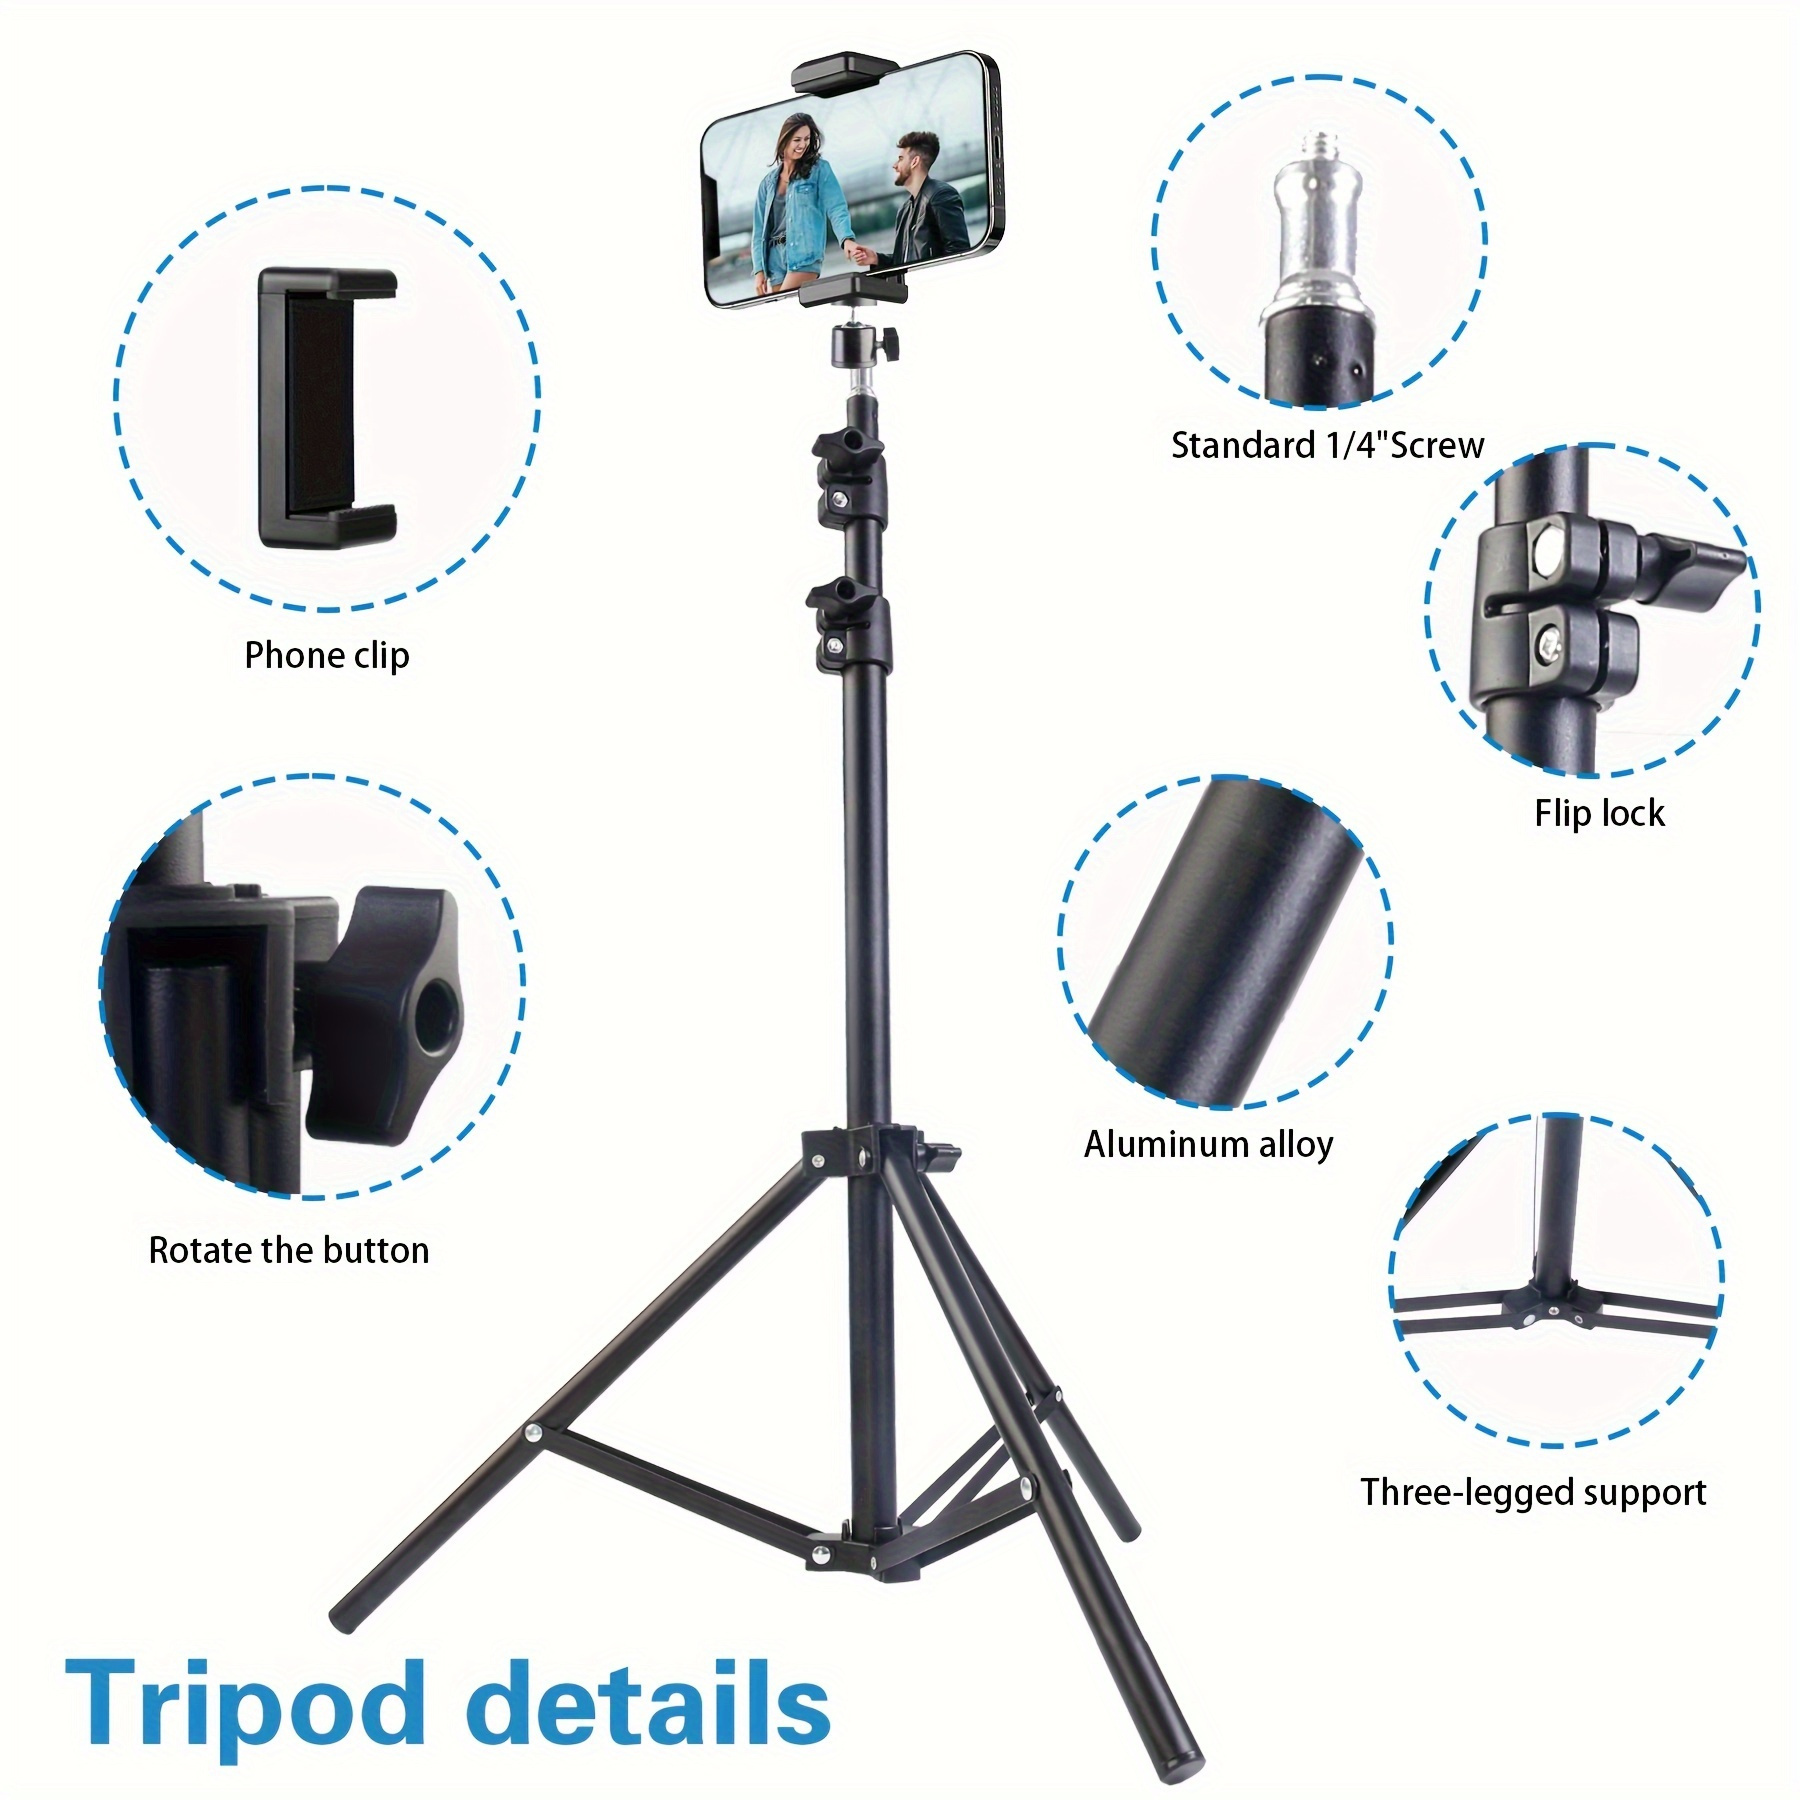 

62 Inch Phone Tripod And Selfie Stick, Expandable Phone Tripod Stand With Phone Holder, Compatible With Iphone/android Phones, Cameras (black)